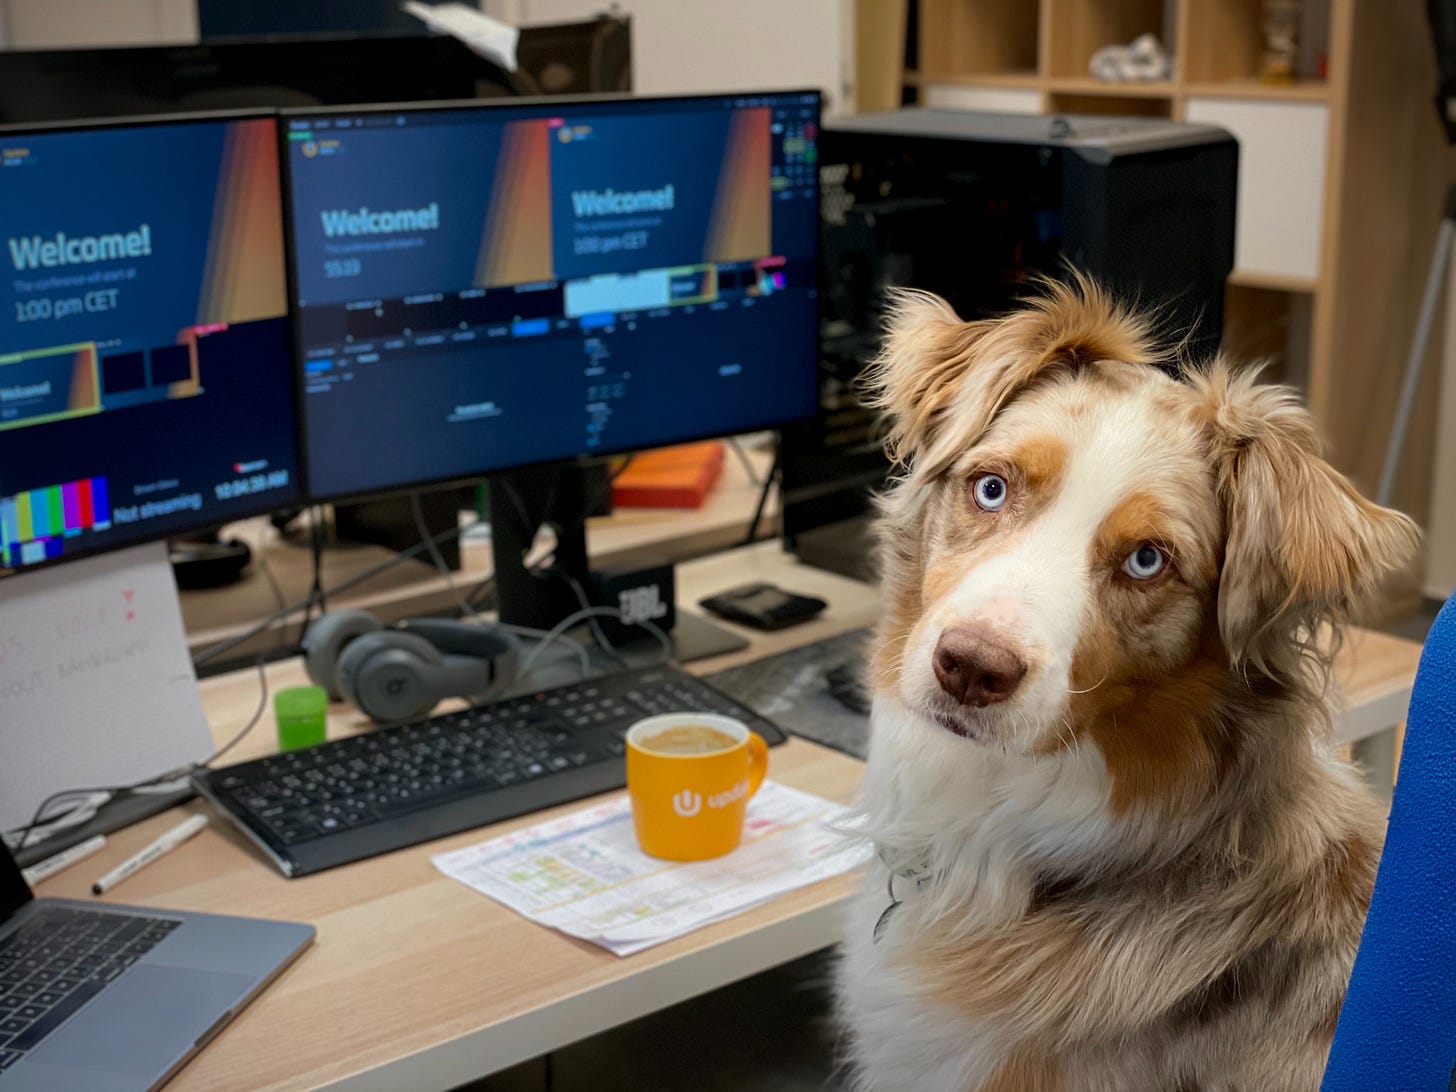 a tri-colored dog with light eye color looks at the camera and sits at a computer desk with two screens. A yellow coffee mug sits between the keyboard and the dog. The dog is white, light brown, and gray. Photo by Pavel Herceg on Unsplash